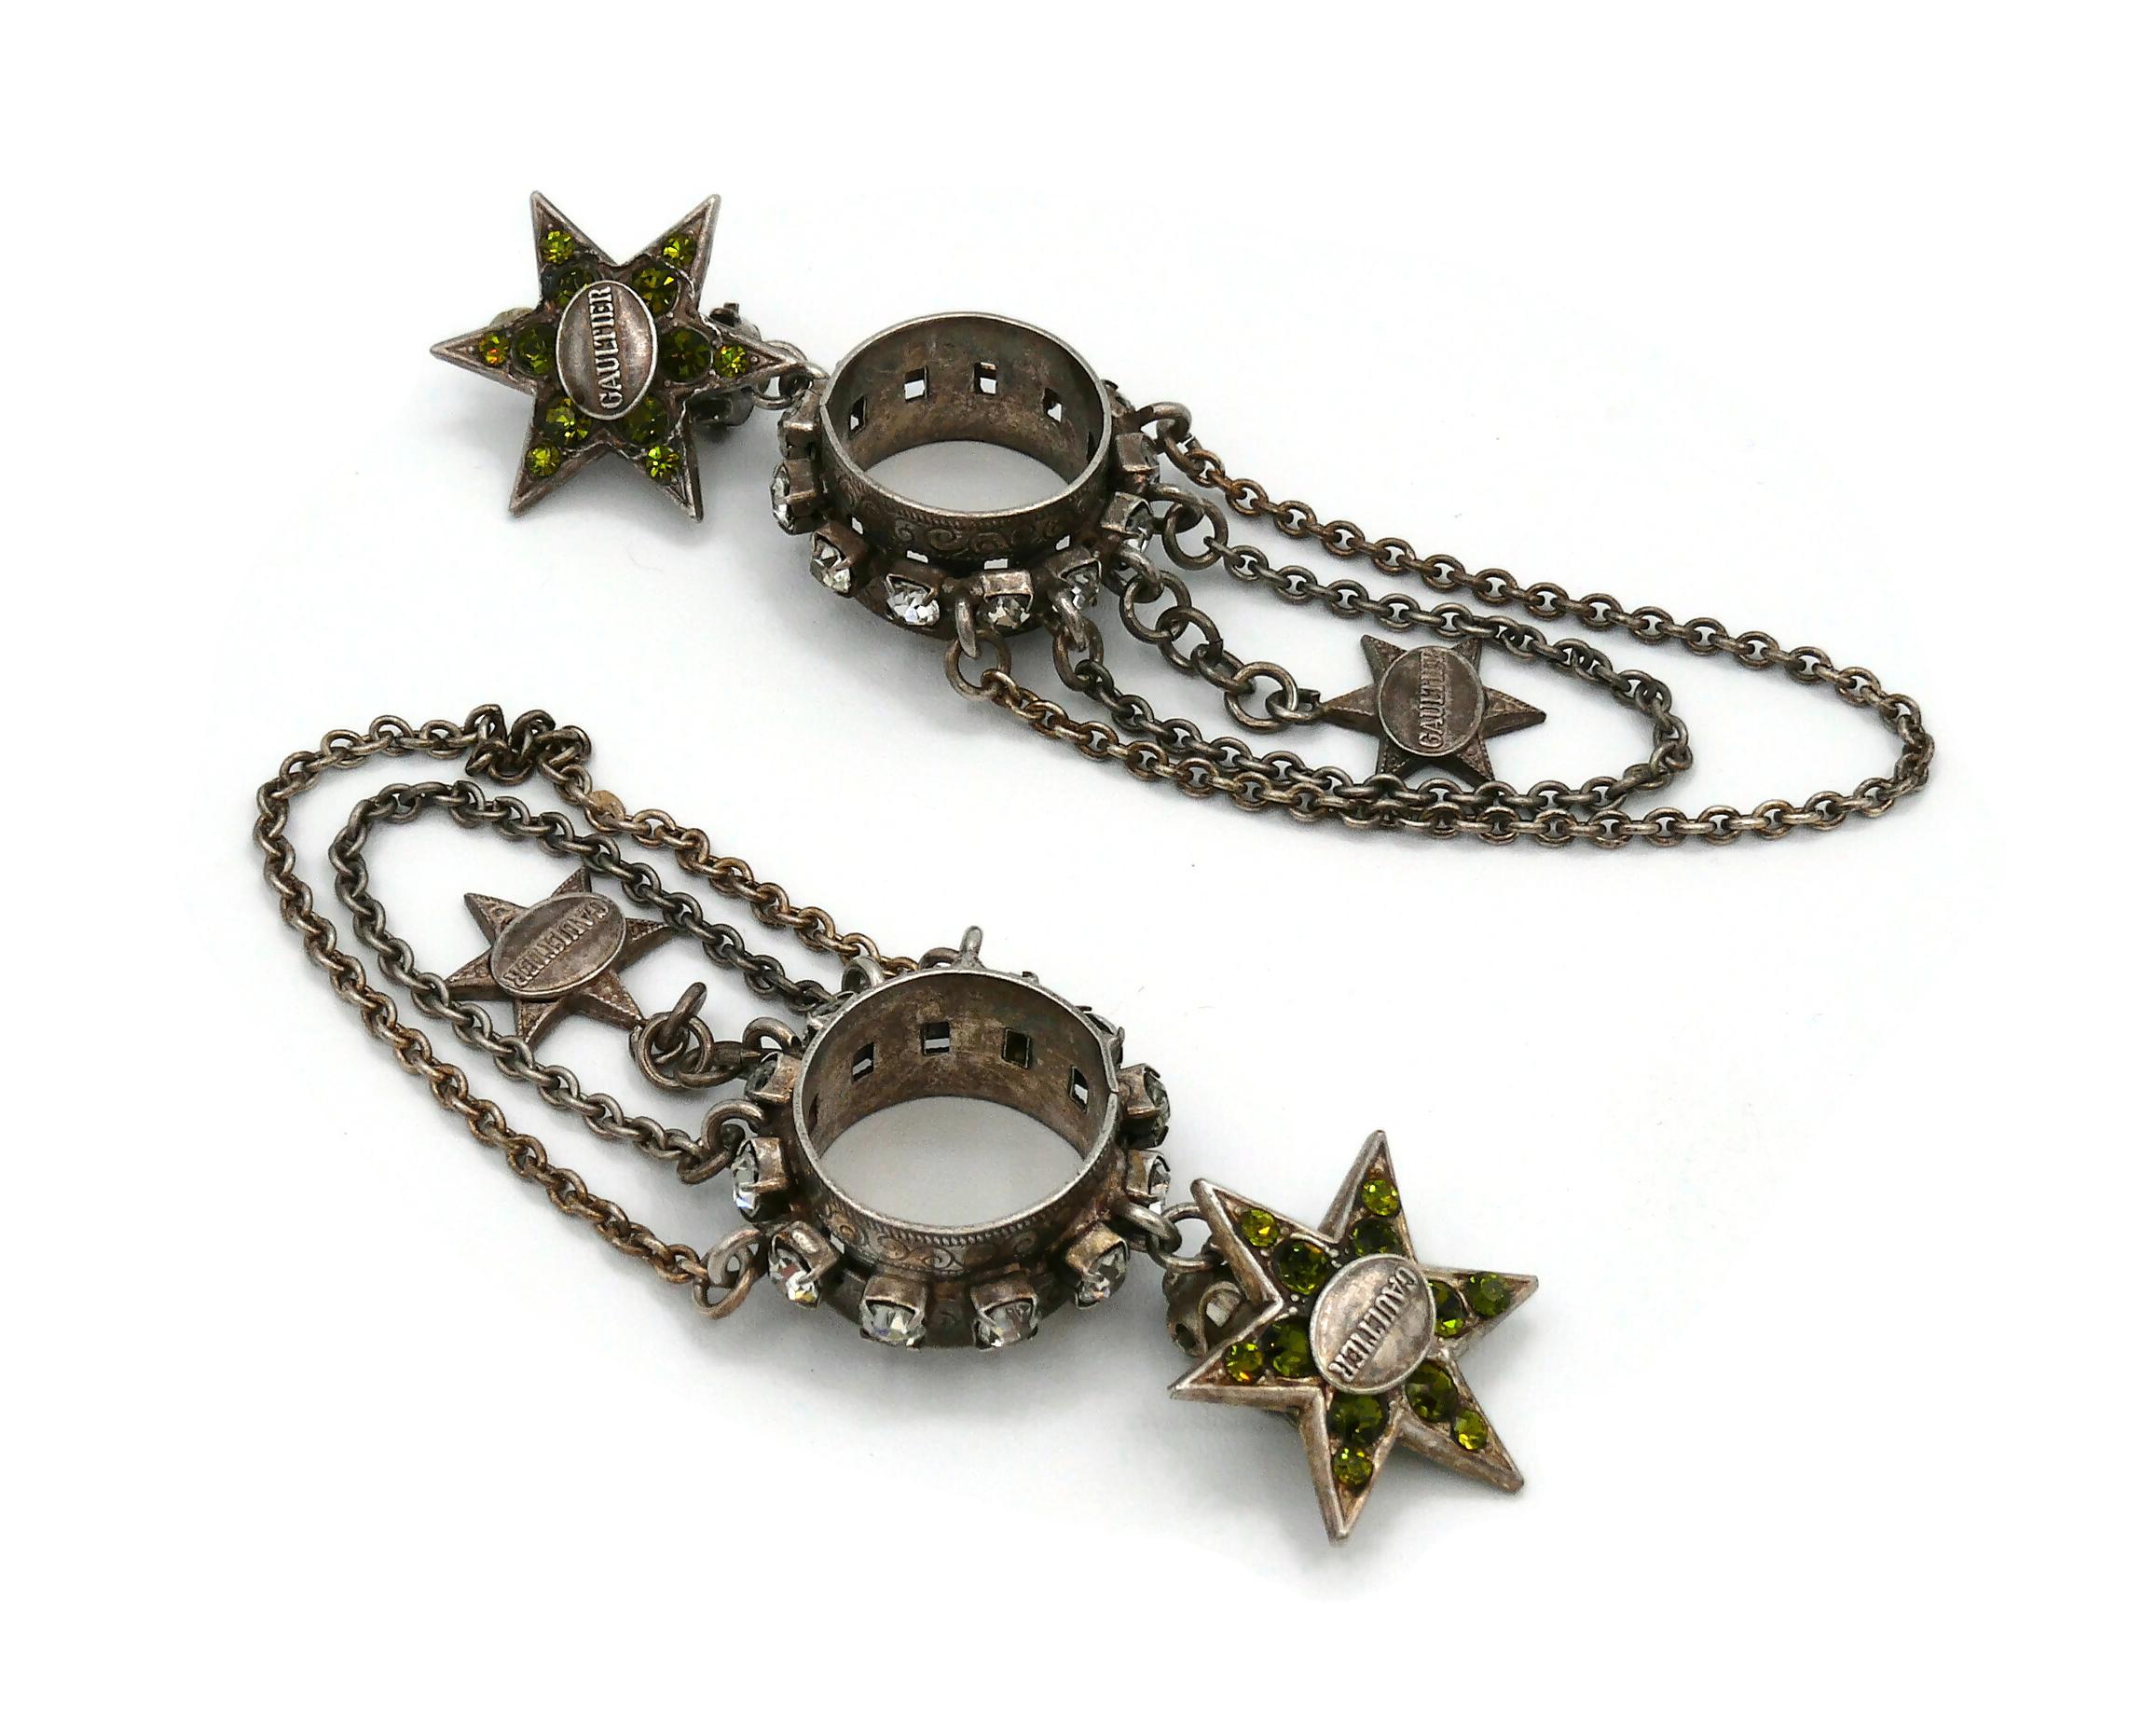 Jean Paul Gaultier Vintage Stars and Chains Jewelled Dangling Earrings